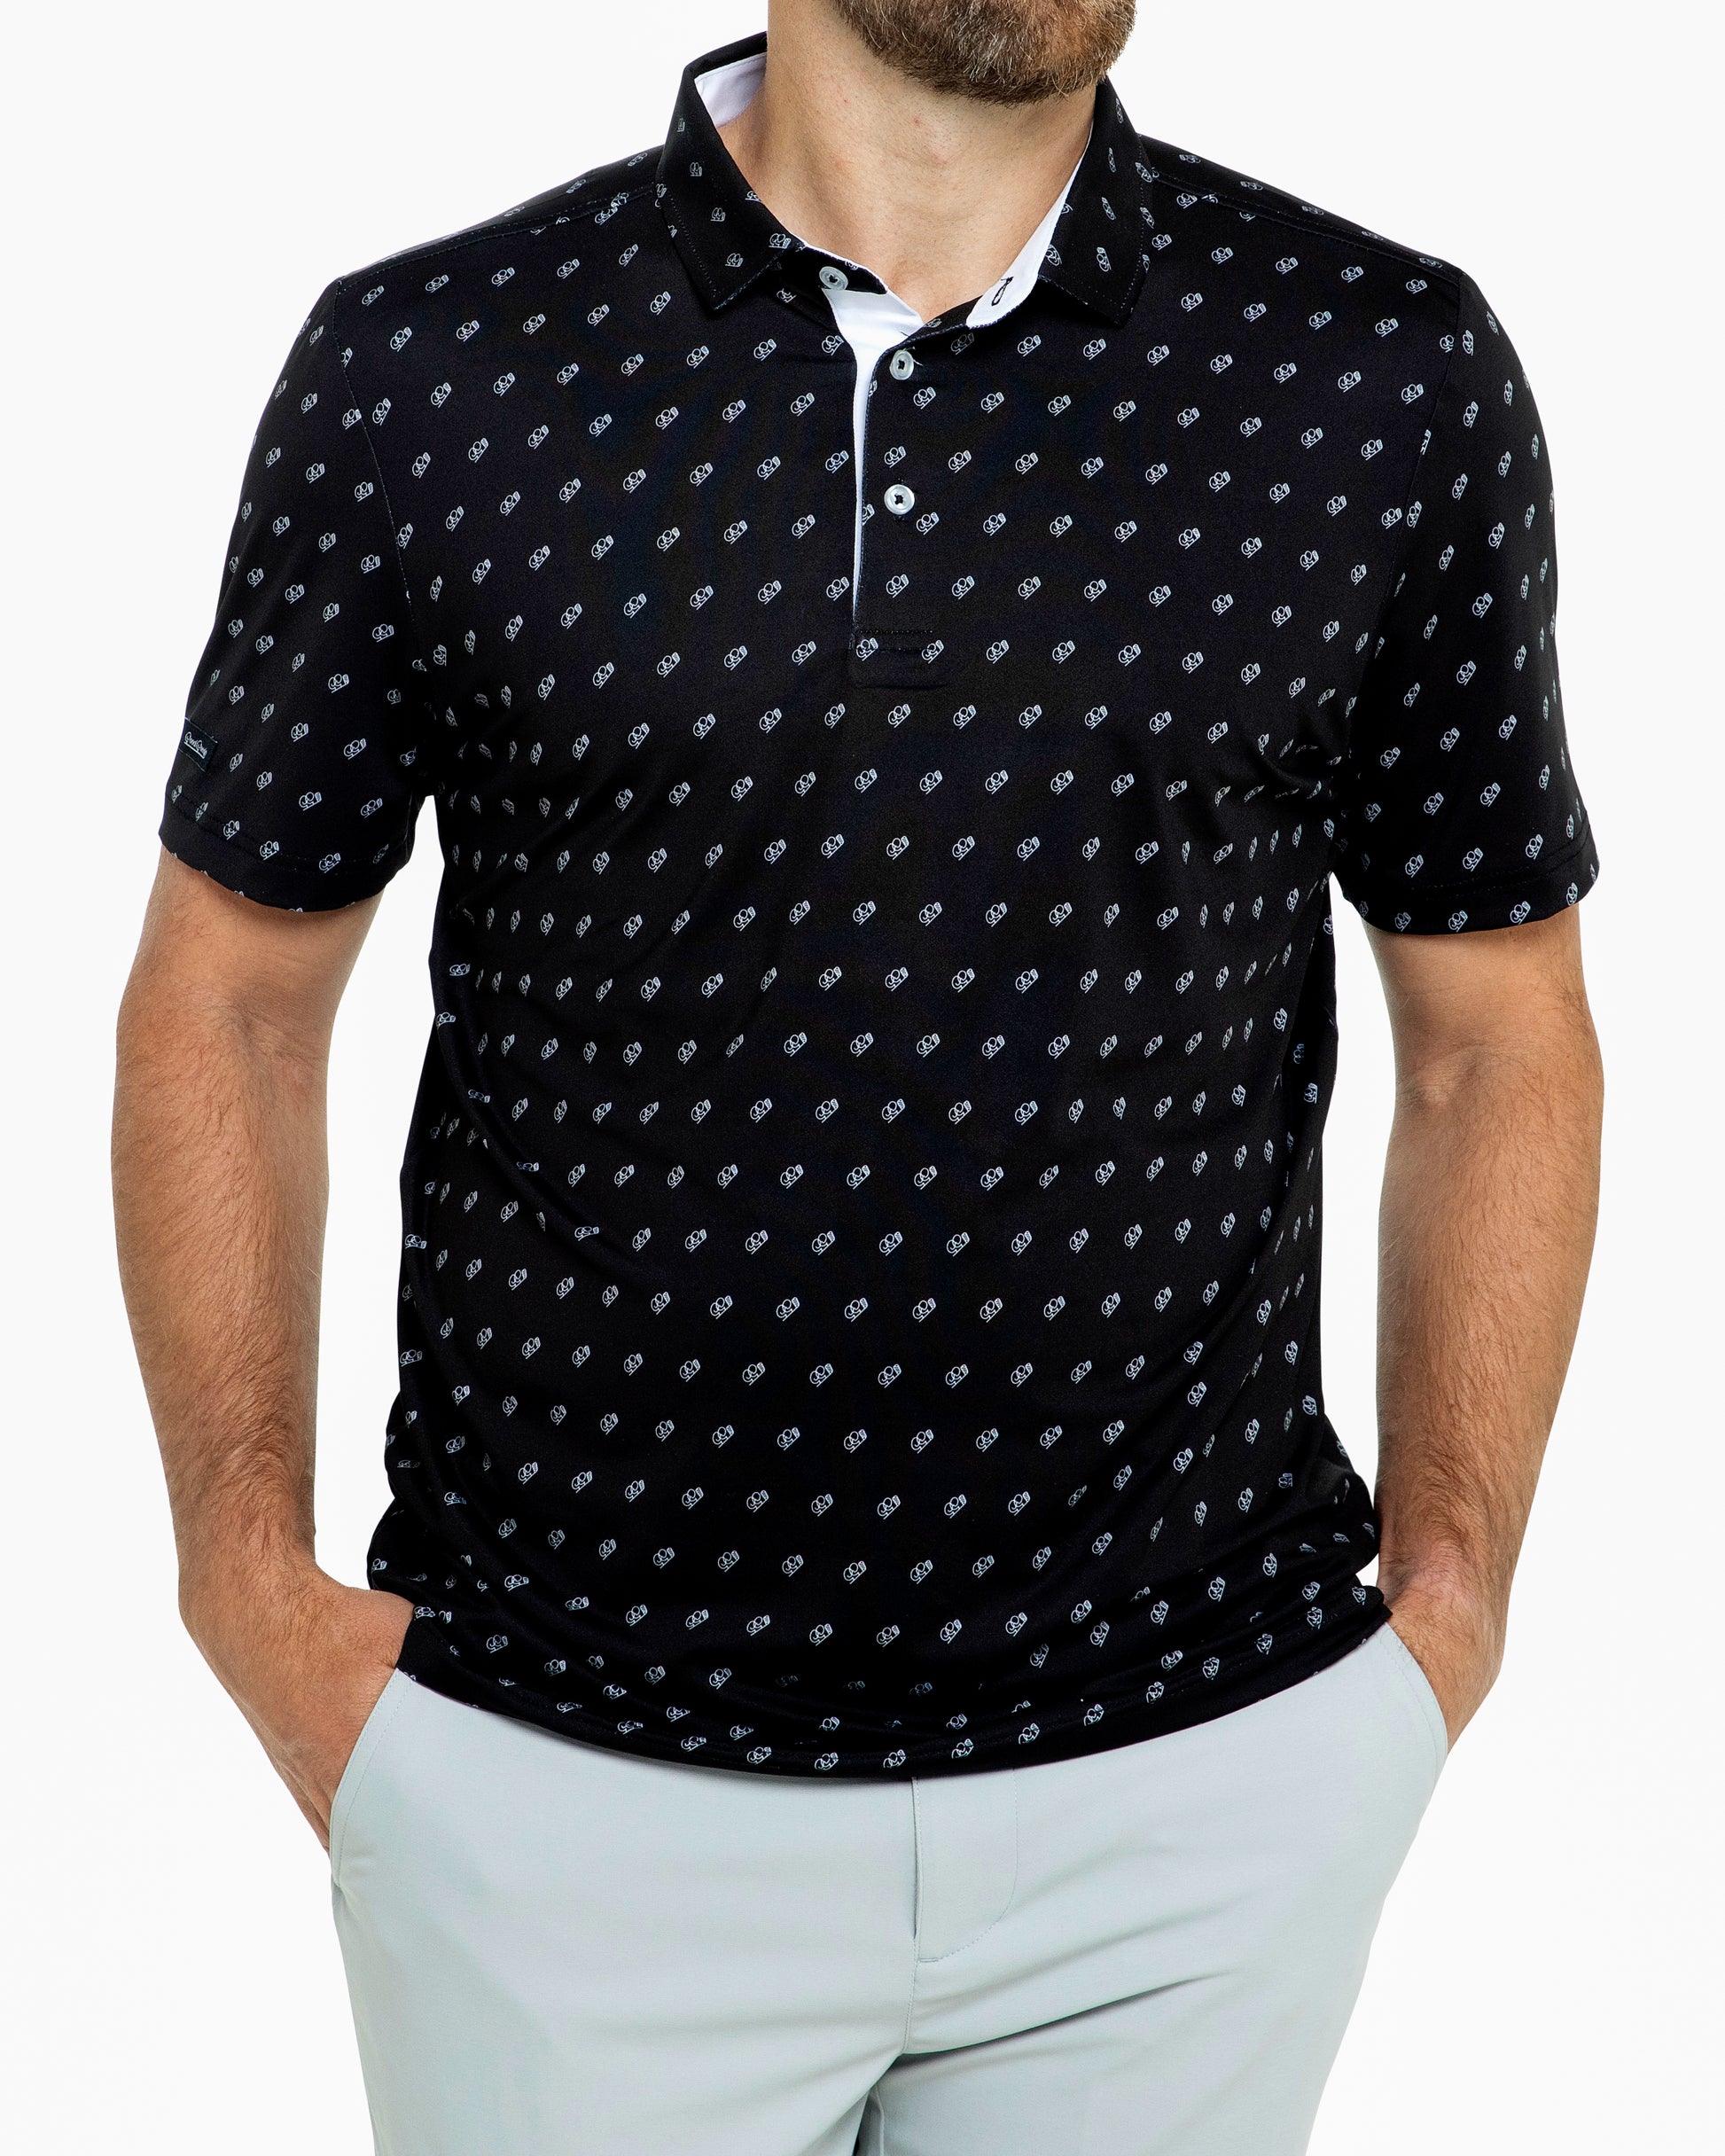 The Elite Polo- Best Golf Performance Polo